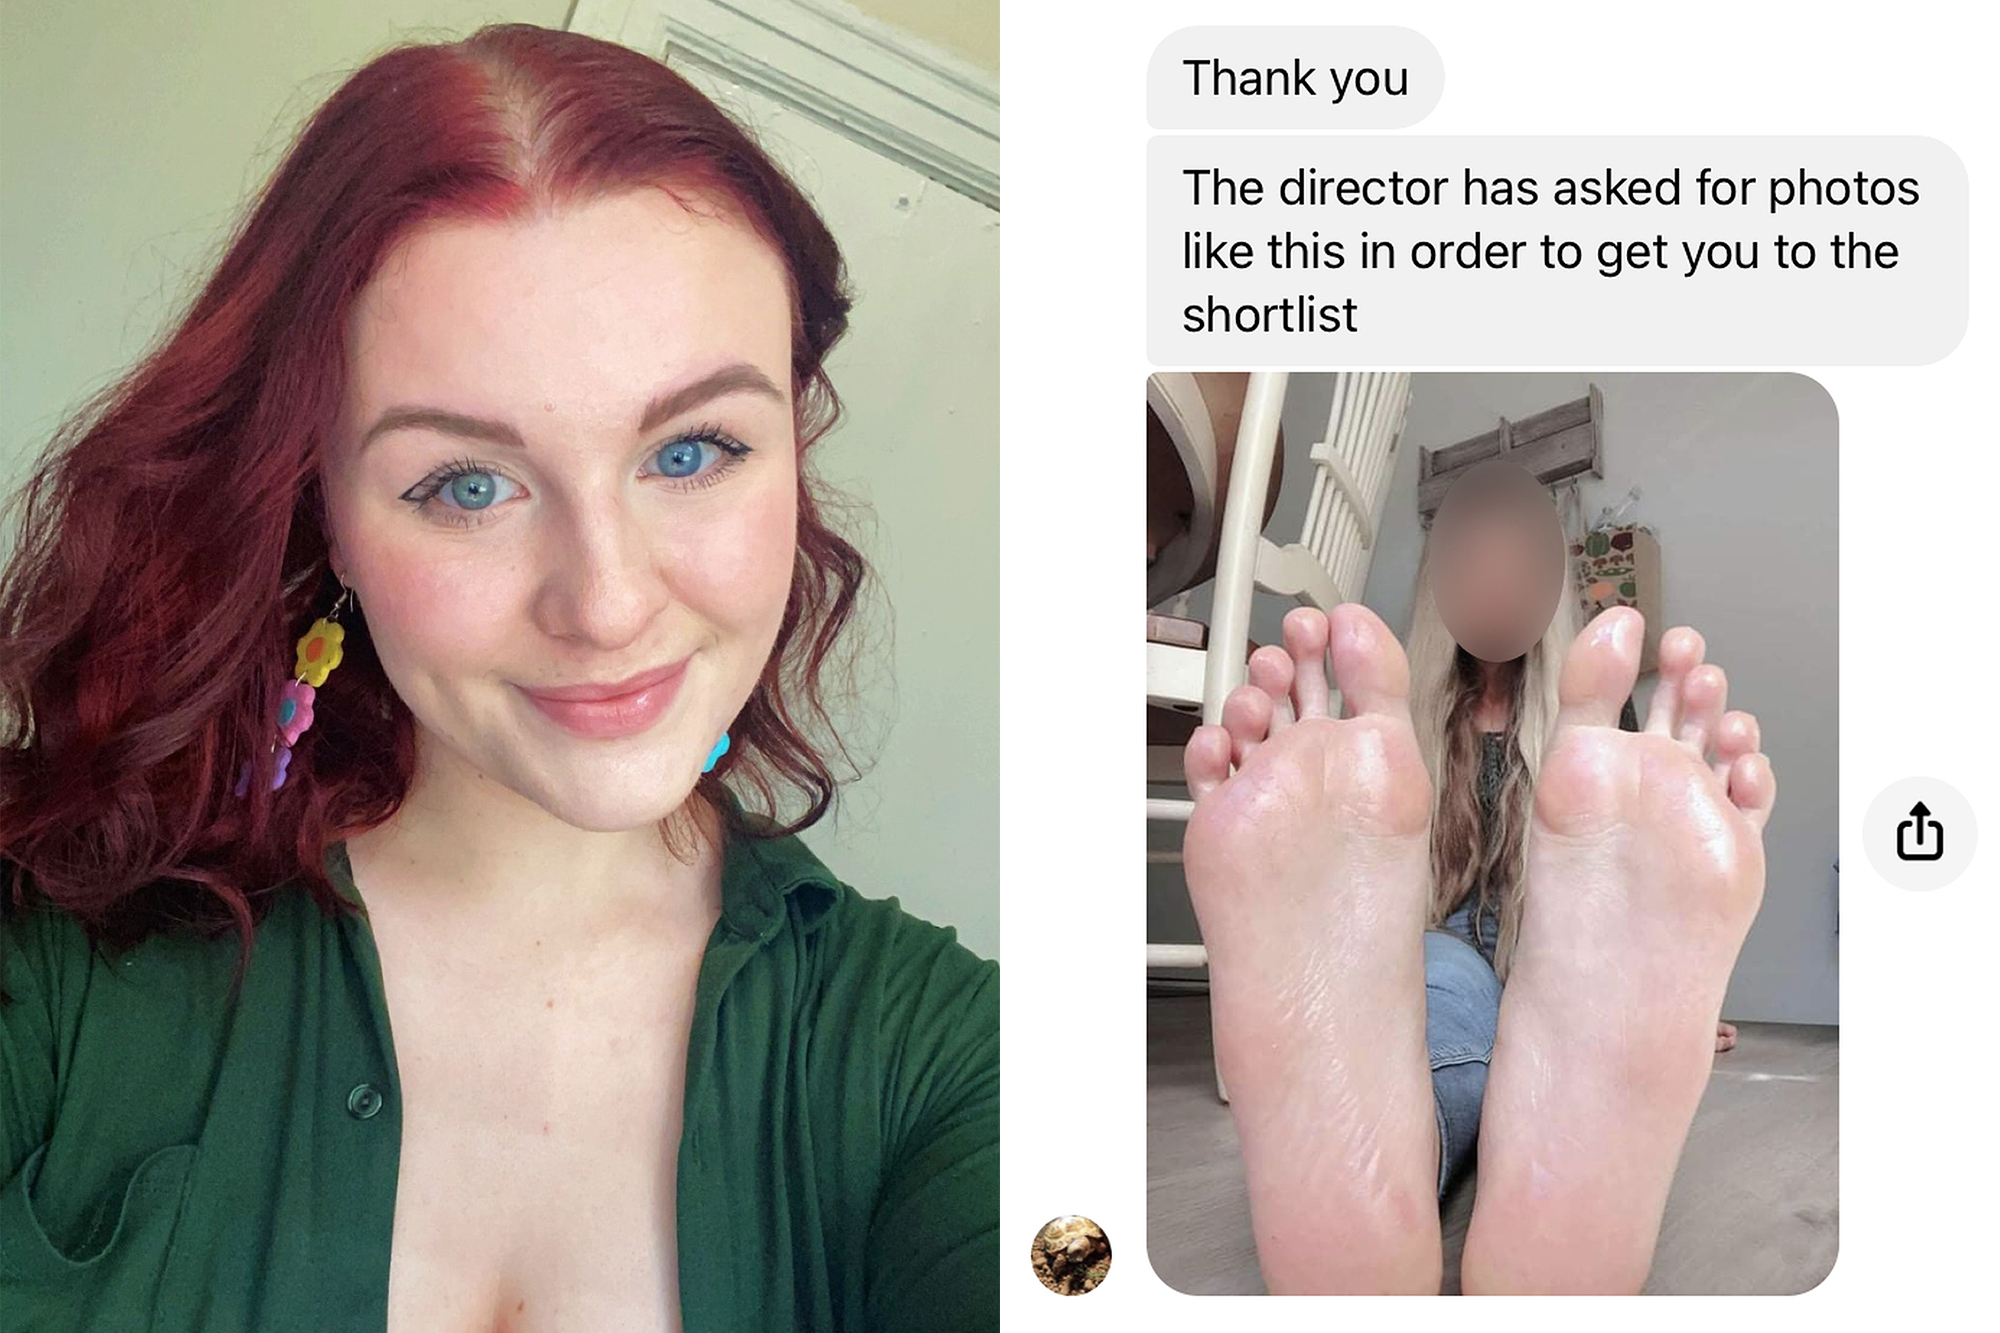 danielle meservey recommends foot worship at work pic